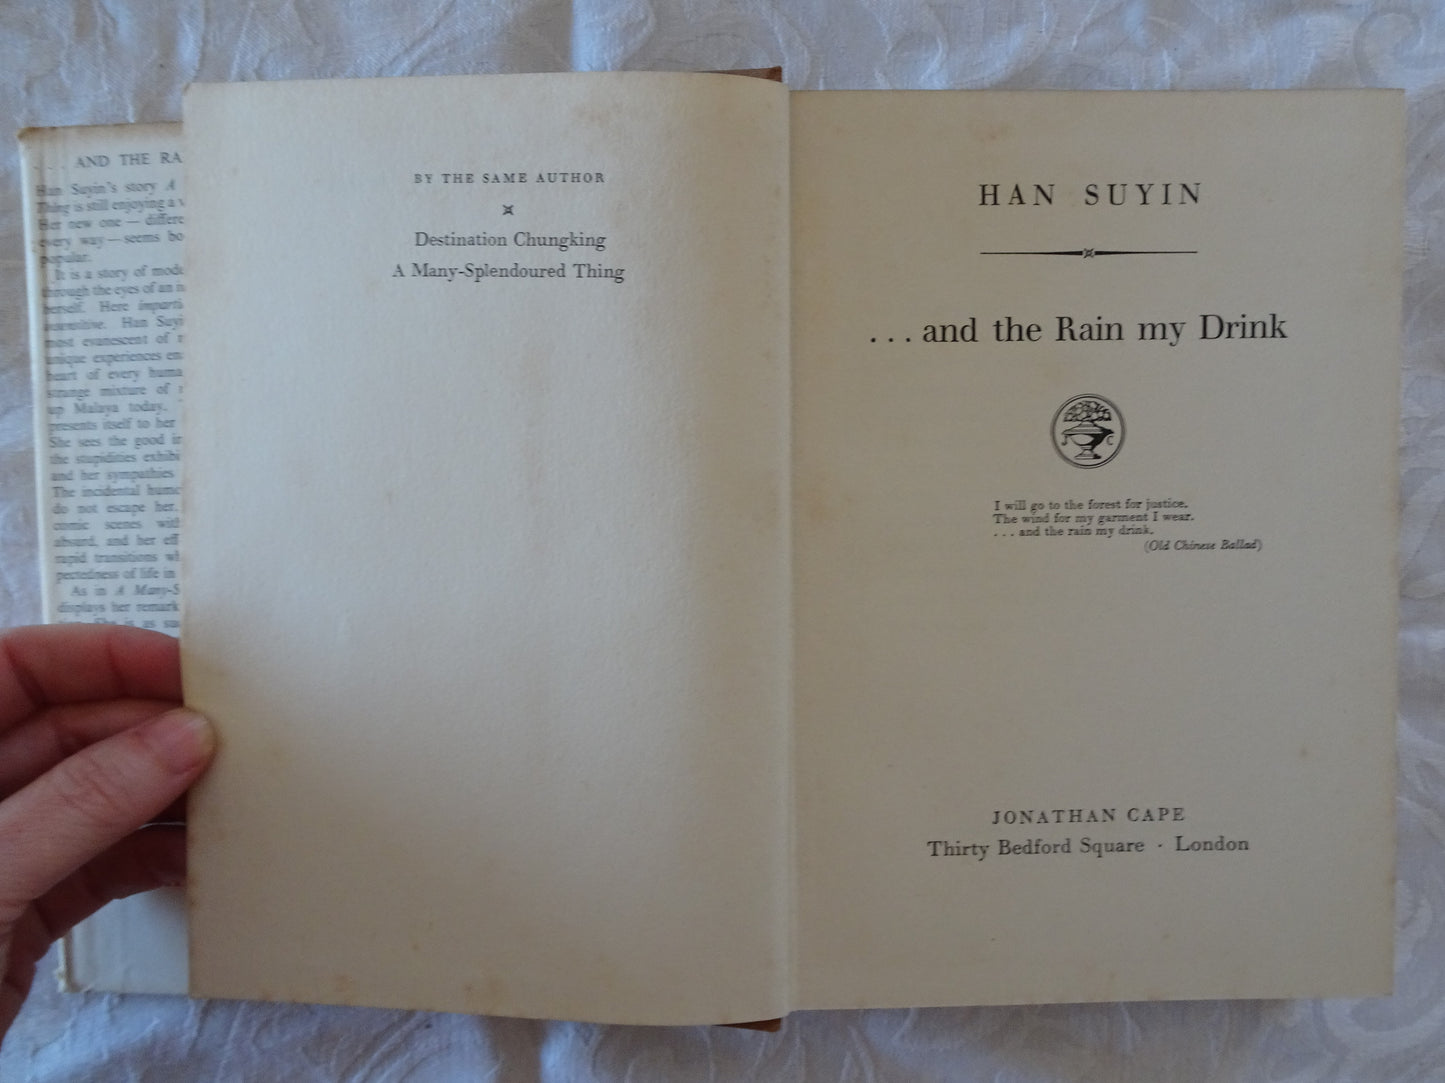 ... and the Rain my Drink by Han Suyin